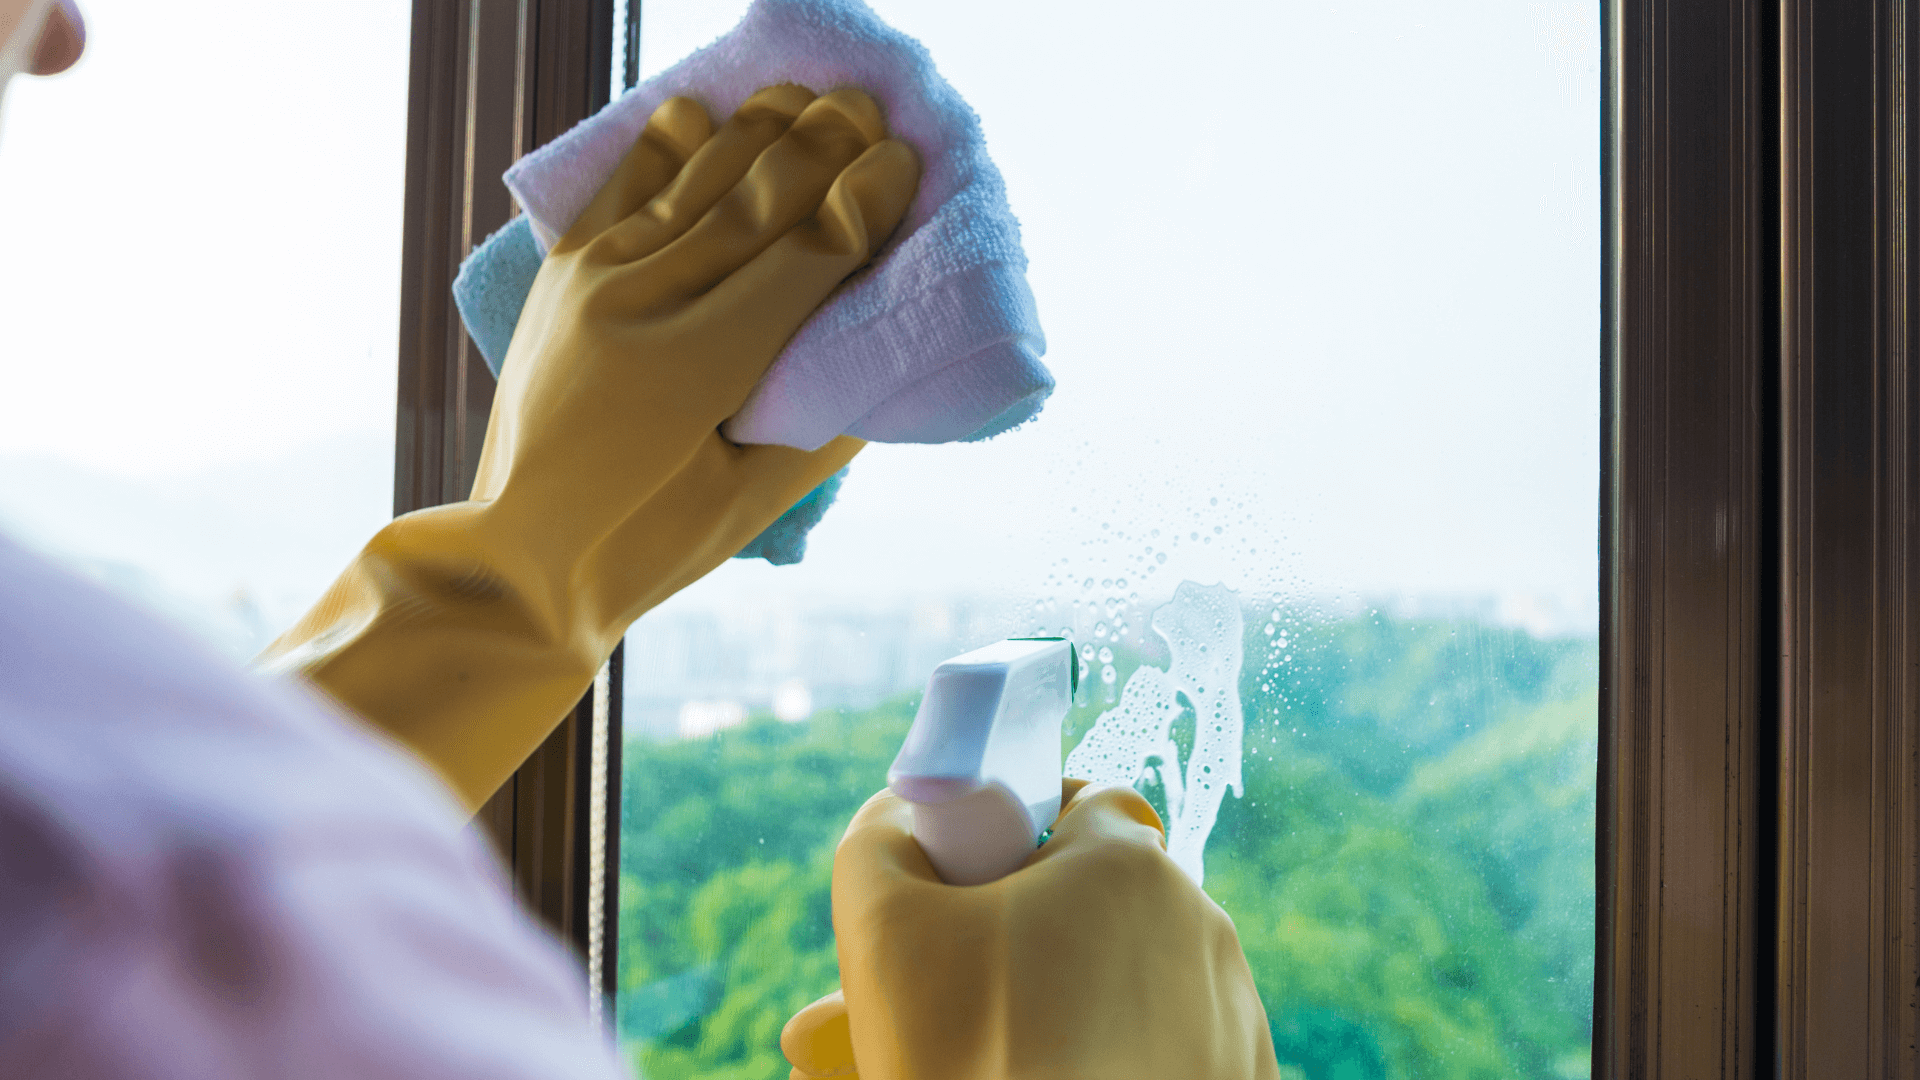 Use microfiber cloths in wiping window treatments, window blinds, and window surfaces.